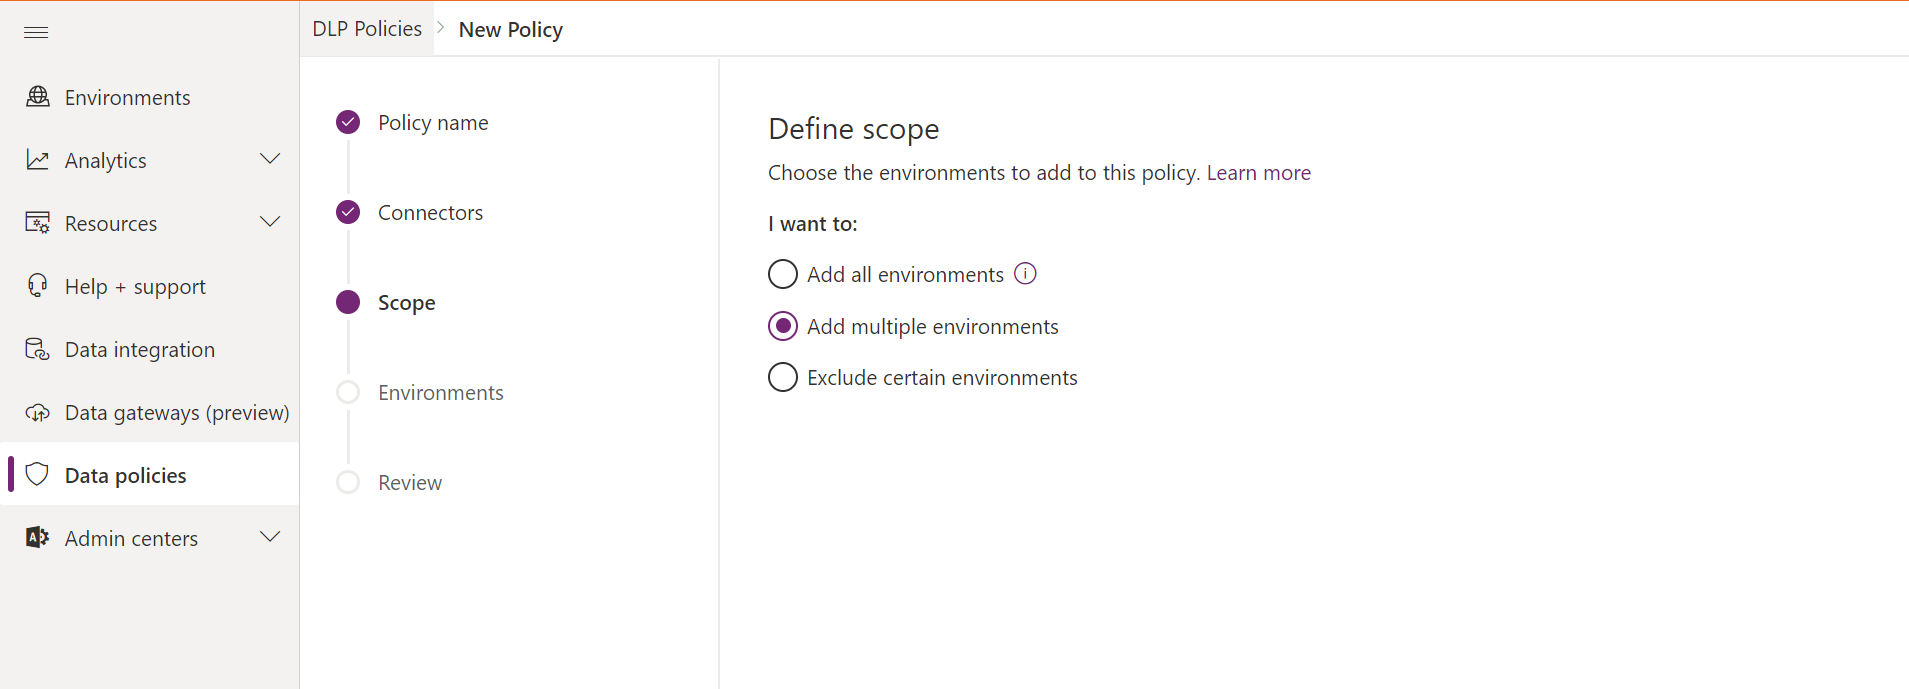 Image of the new policy page.